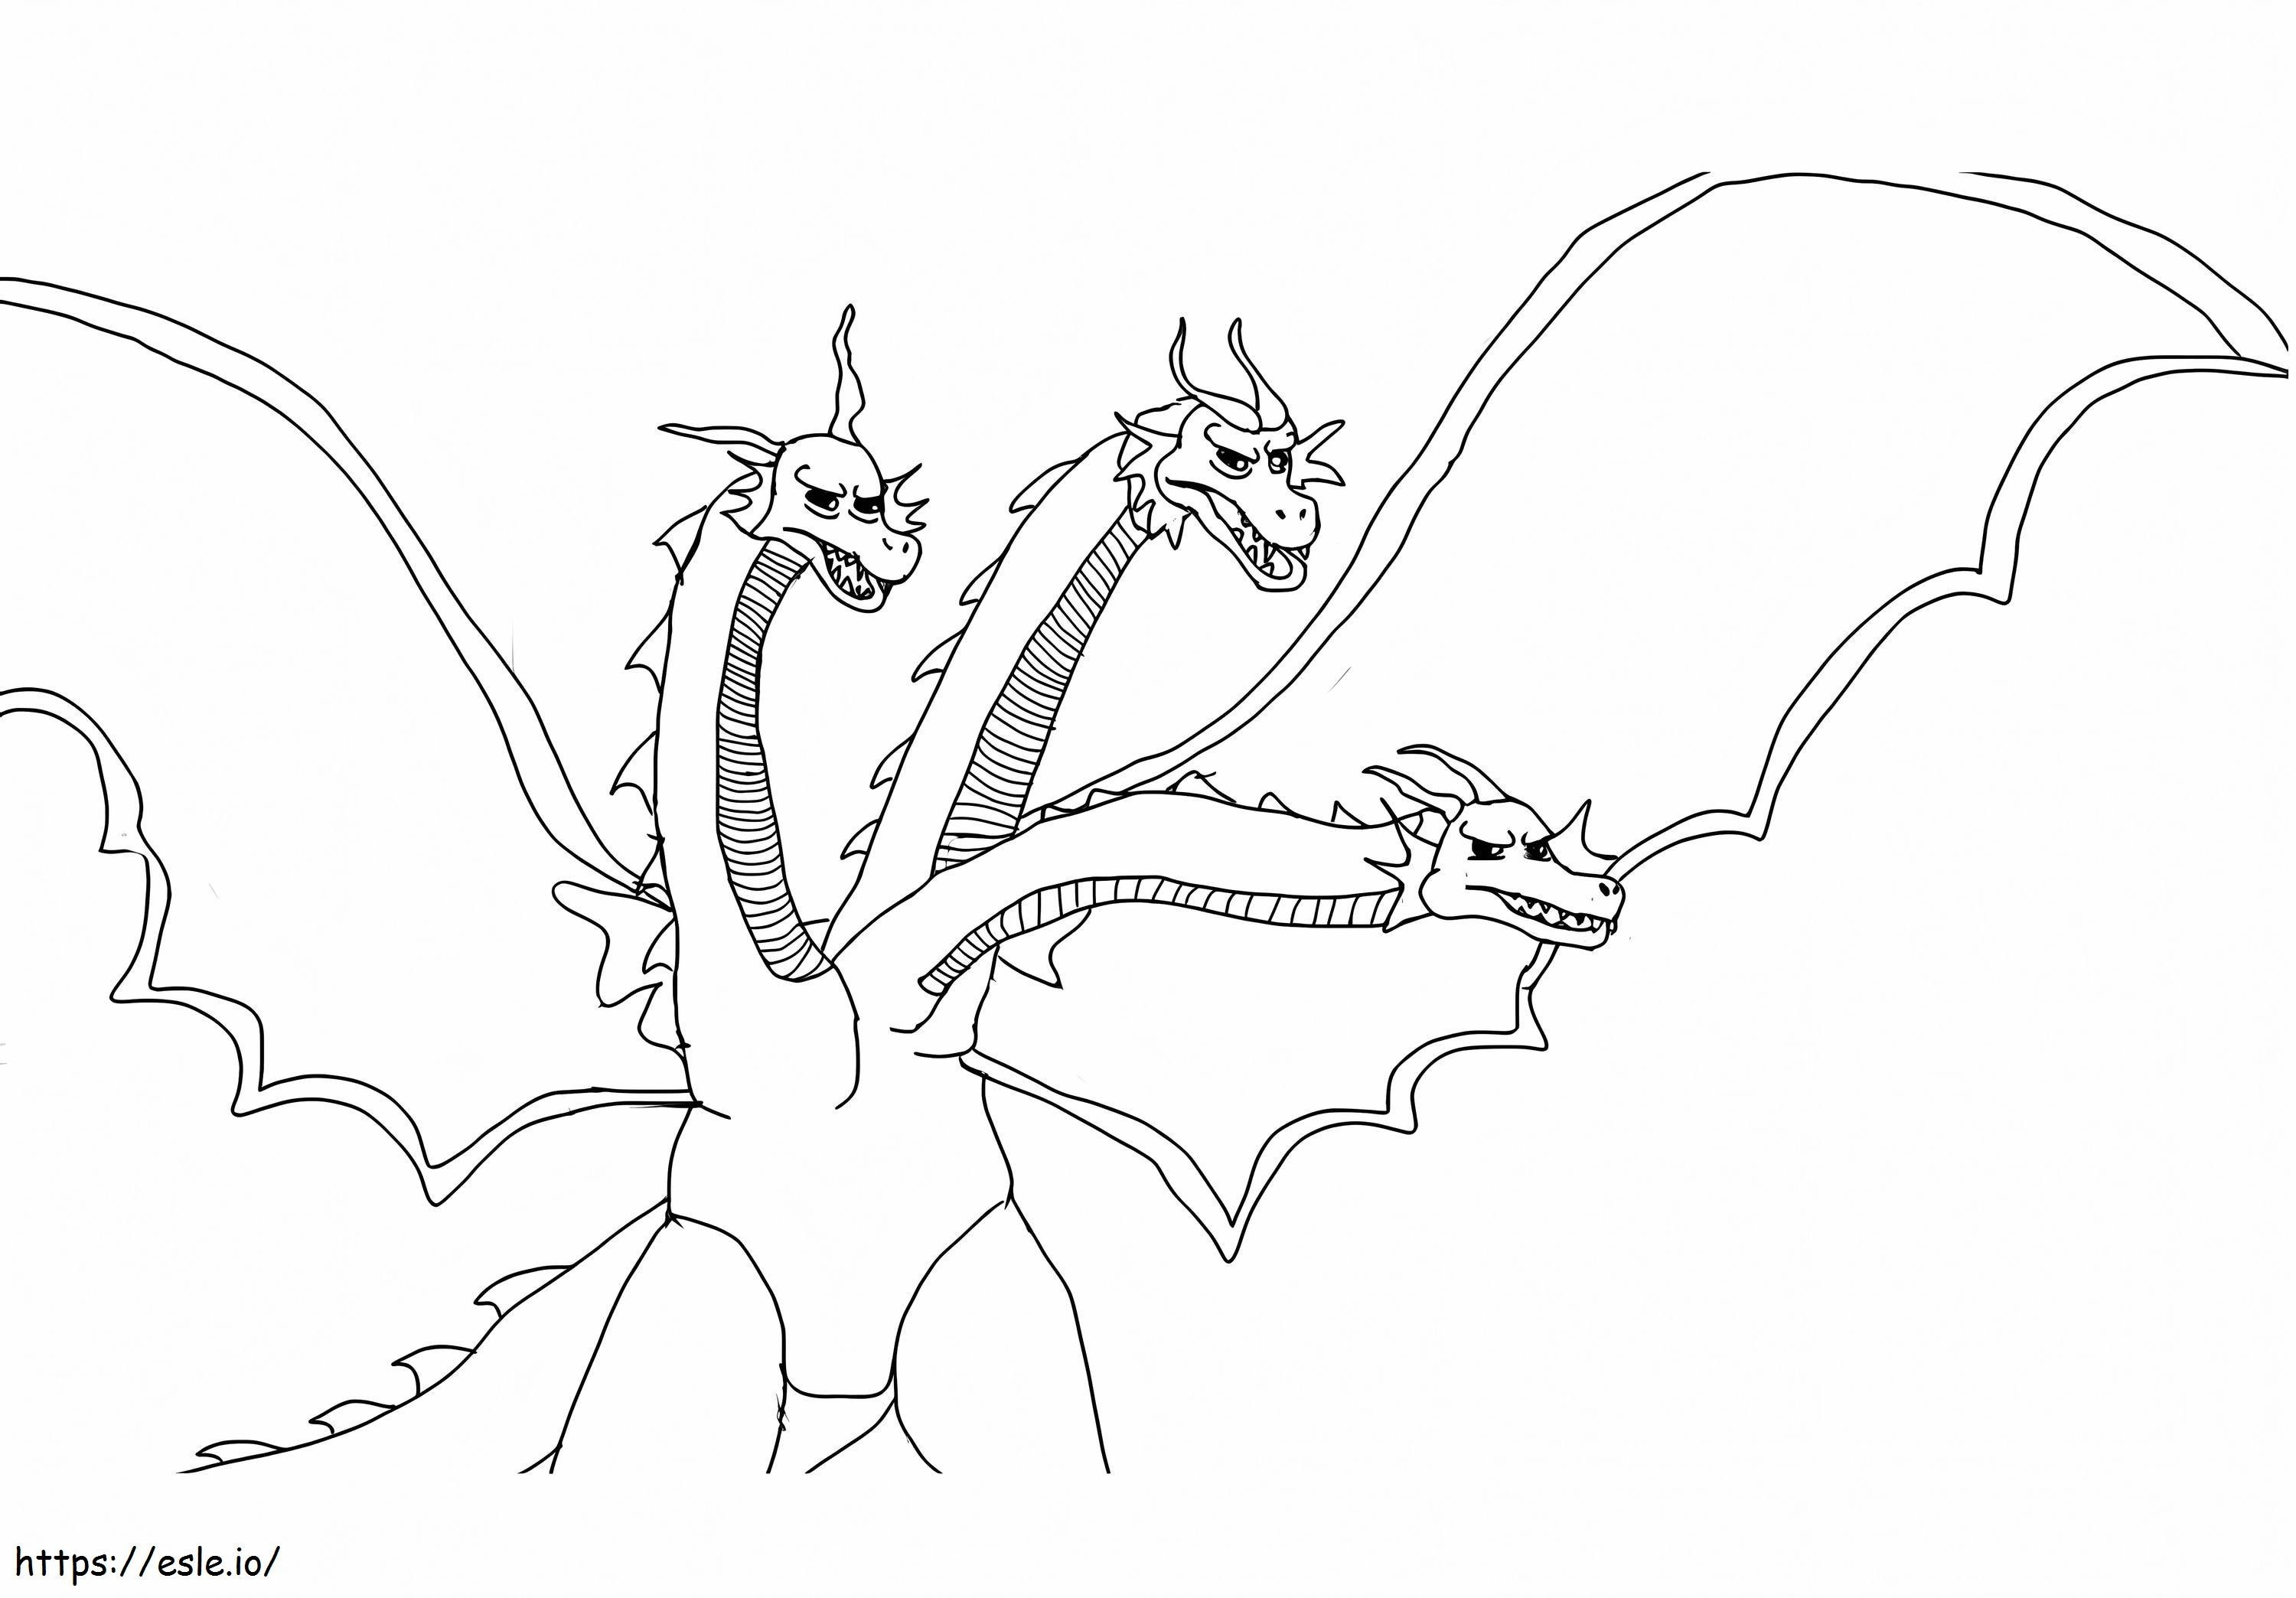 Great Ghidorah coloring page